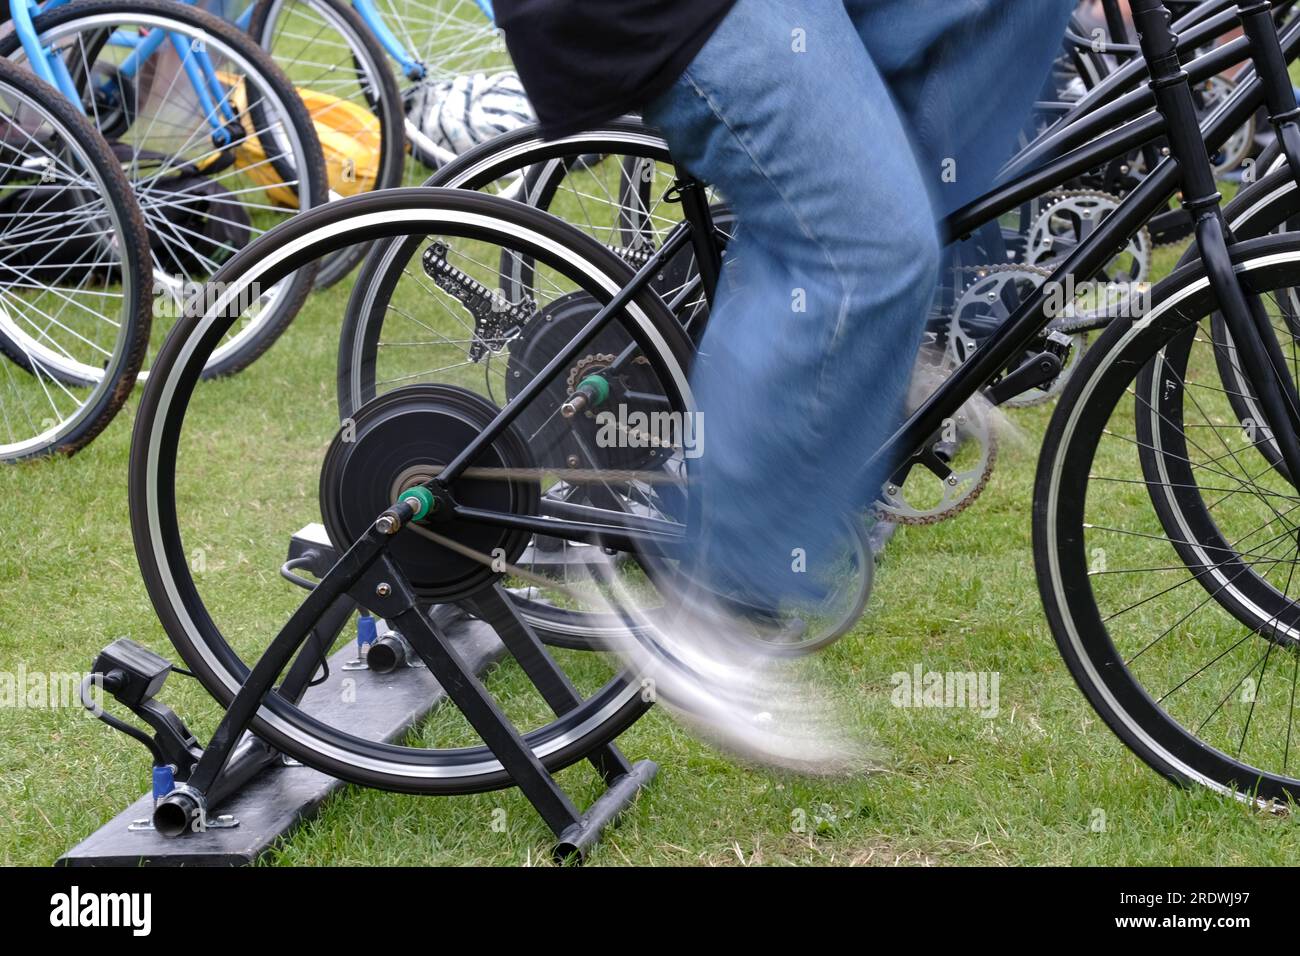 Bristol, UK. 23rd July, 2023. Bristol Cycle Cinema present films on College Green powered by bicycles. Sunday nights presentation is The Truman Show by Peter Weir. Credit: JMF News/Alamy Live News Stock Photo